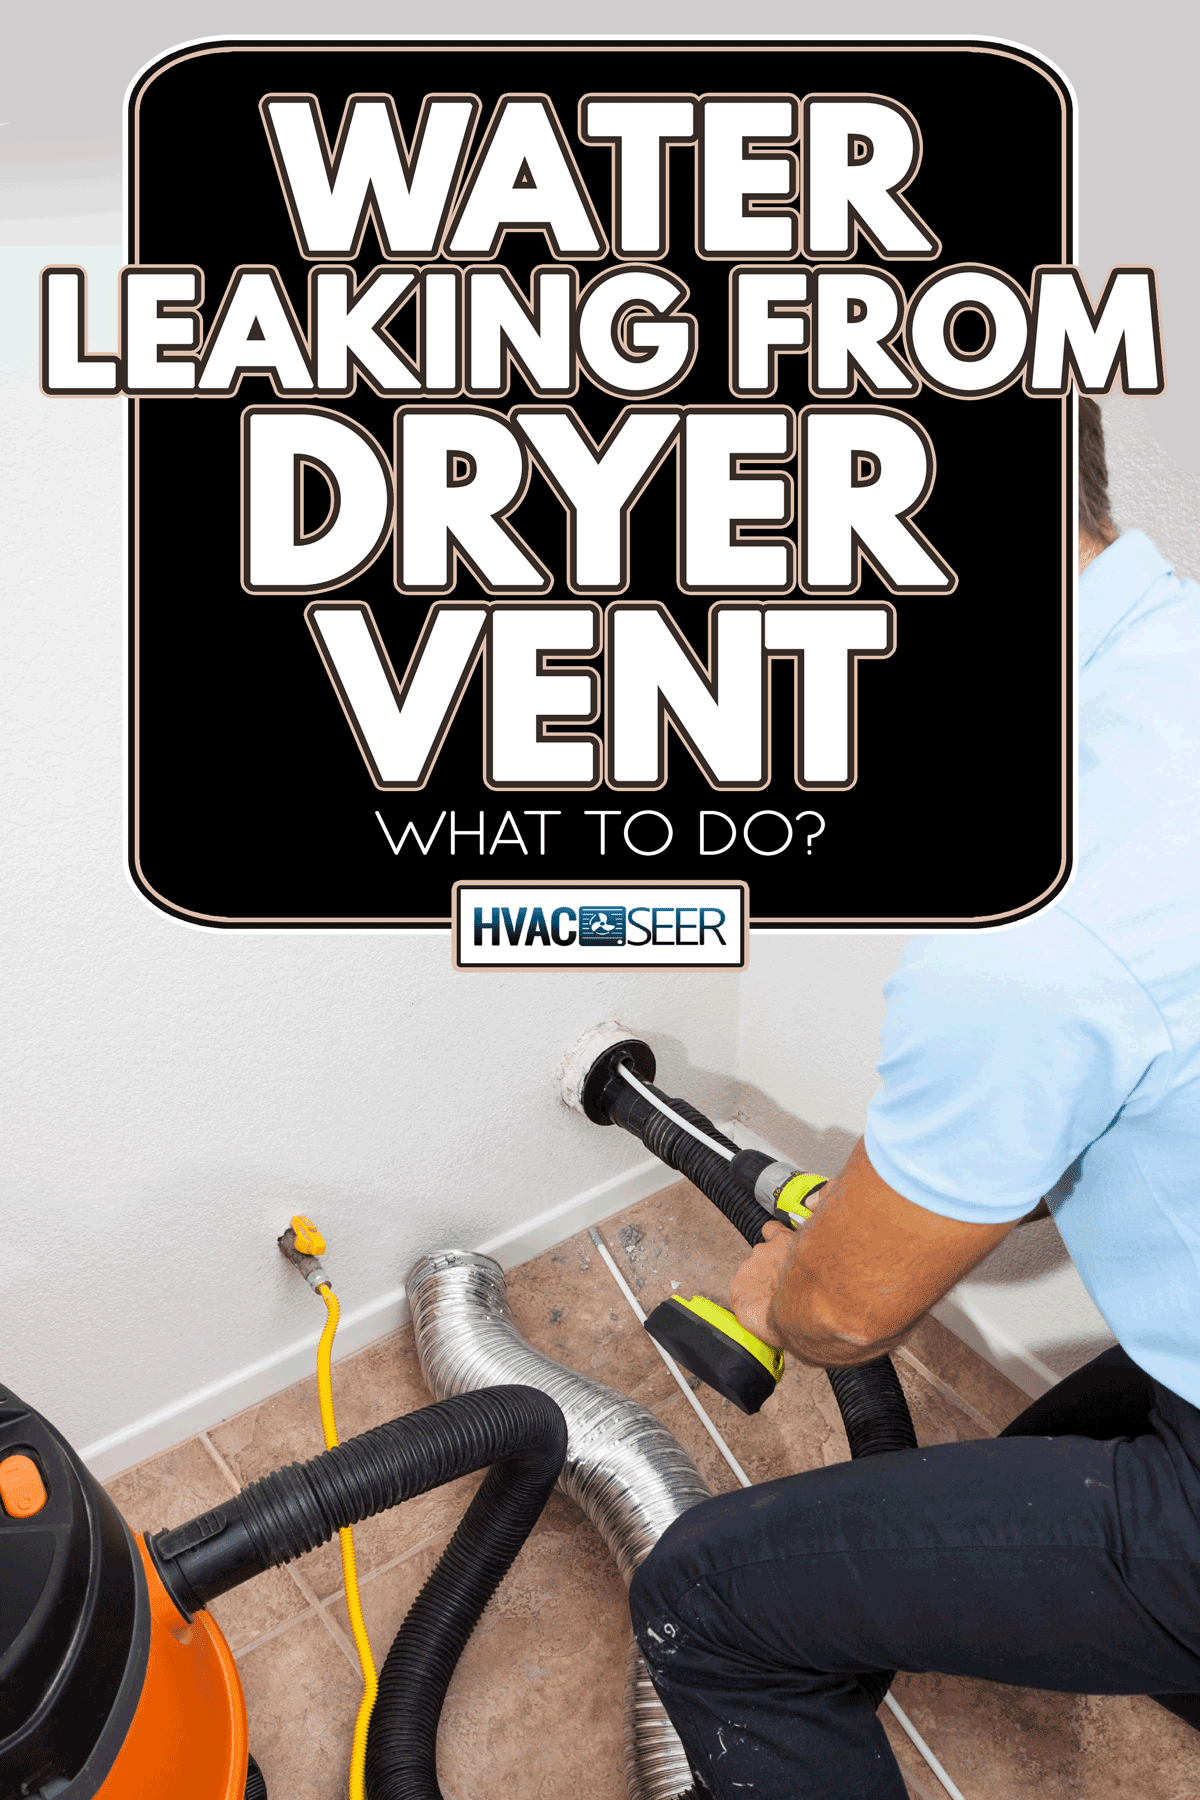 Man use vacuum cleaner to clean dryer vent, Water Leaking From Dryer Vent - What To Do?